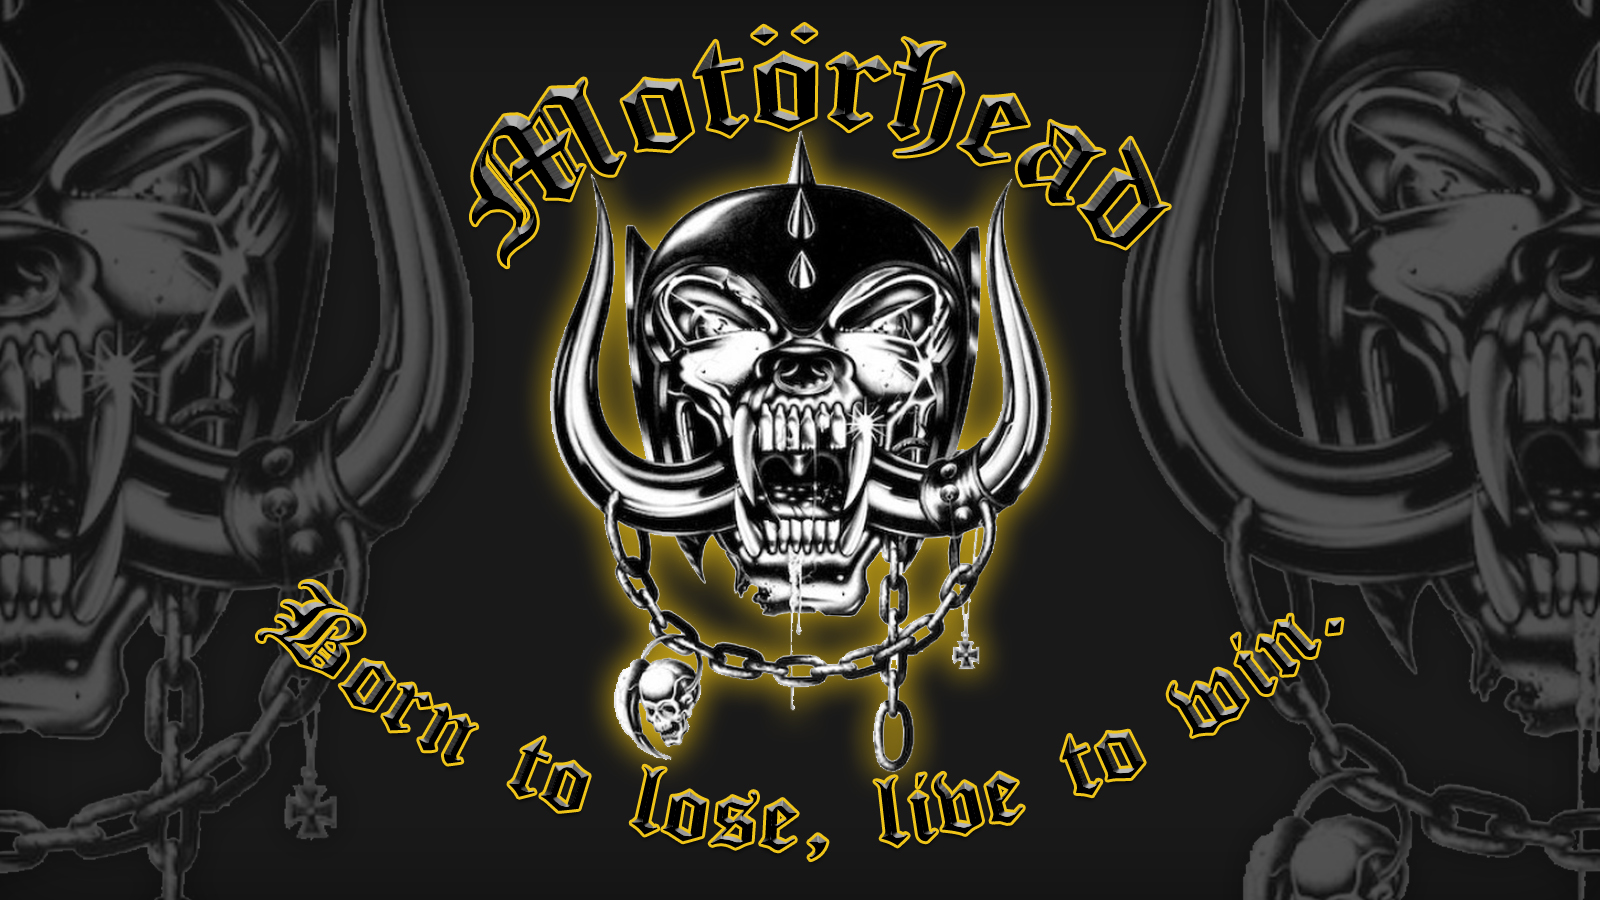 Motorhead Pictures To Pin